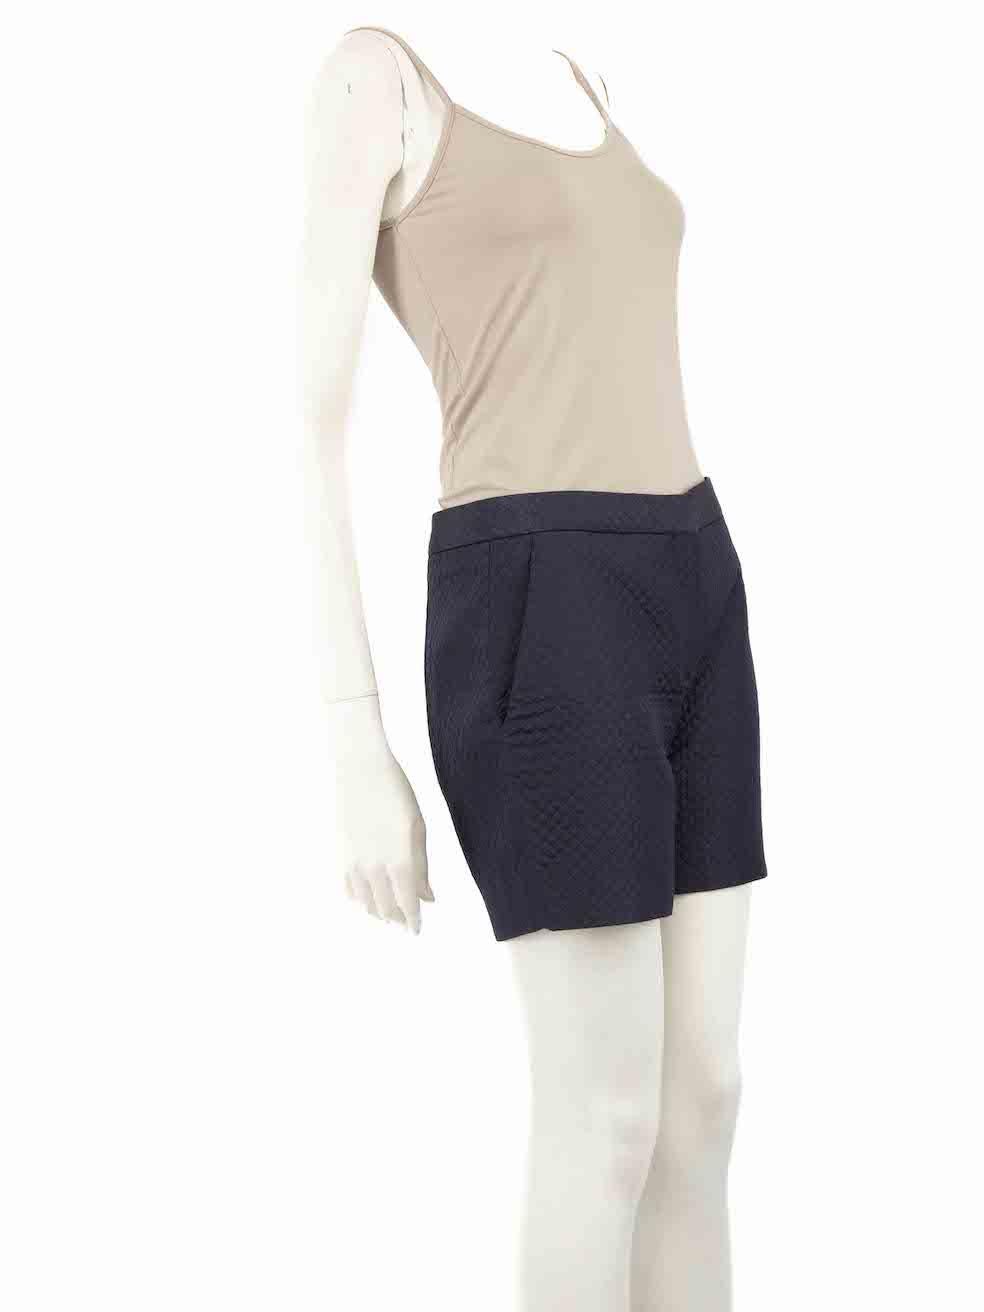 CONDITION is Very good. Hardly any visible wear to shorts is evident on this used Christian Dior designer resale item.
 
 
 
 Details
 
 
 Navy
 
 Silk
 
 Shorts
 
 Quilted accent
 
 Mid rise
 
 Front zip closure with clasp and button
 
 2x Front